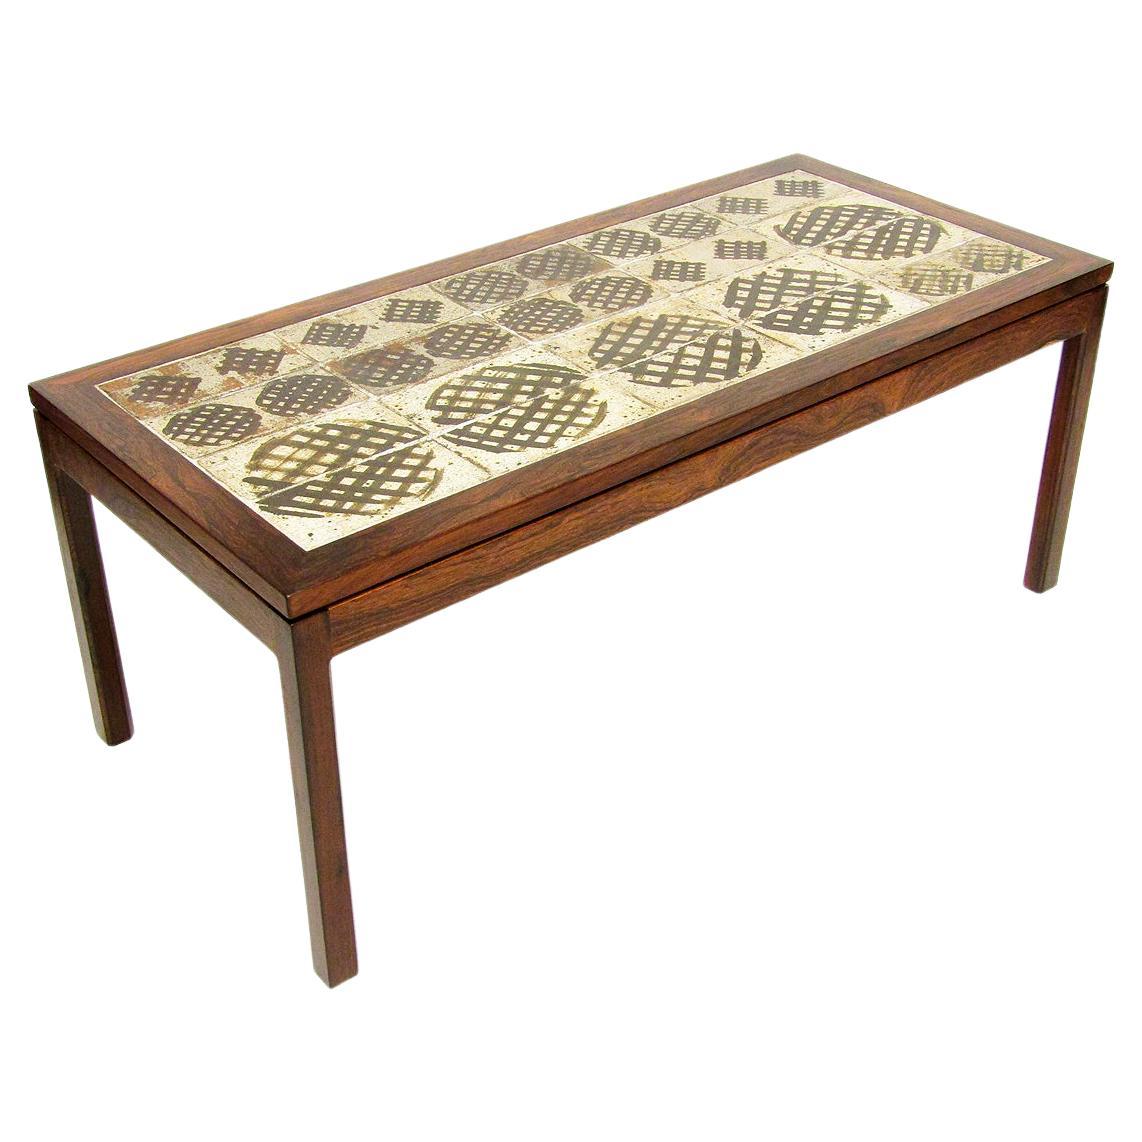 Large 1970s Danish Art Tile Coffee Table in Rosewood by Tue Poulsen & Eric Wörtz For Sale